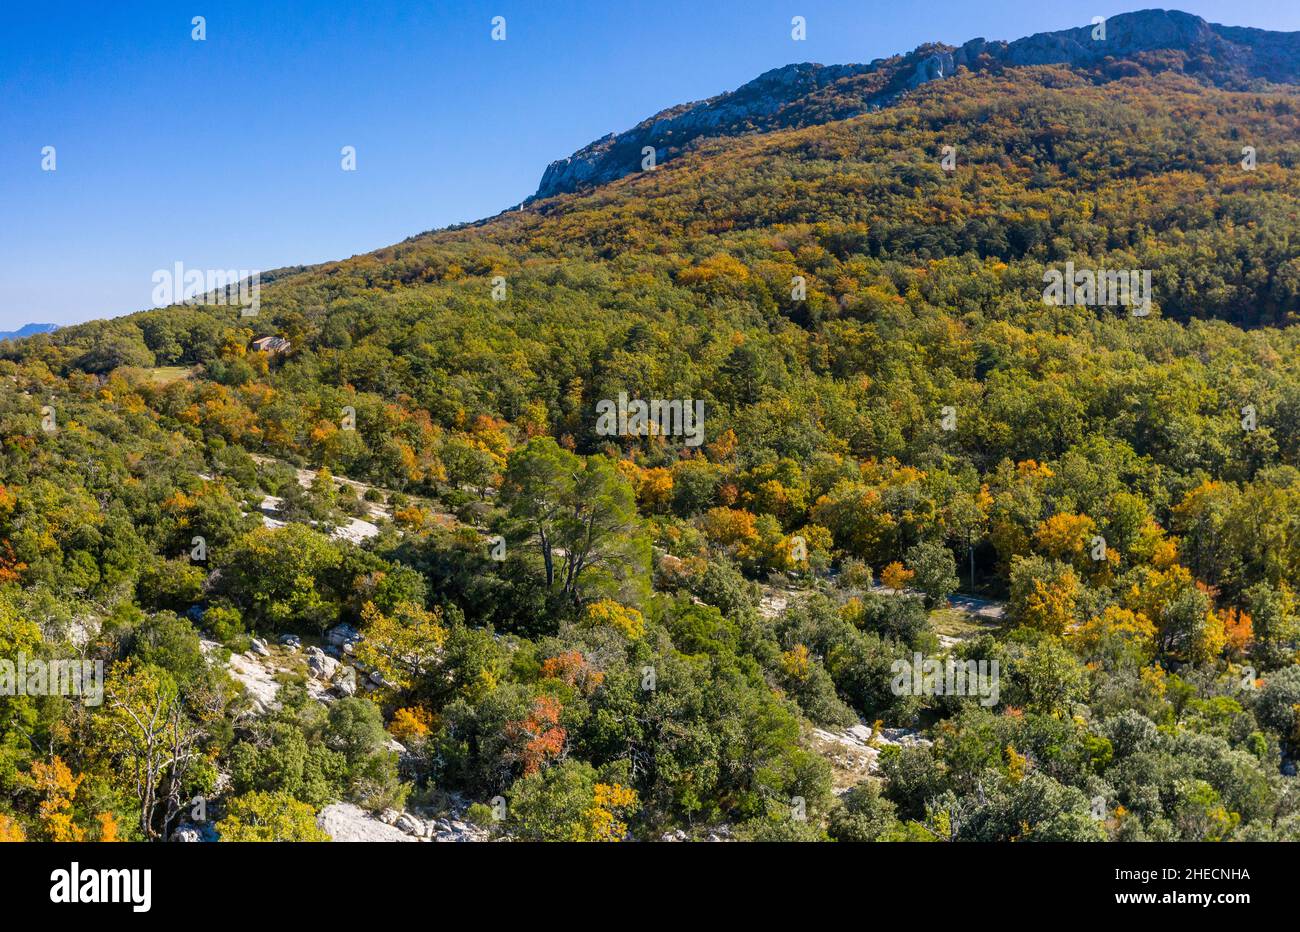 France, Var, Sainte Baume Regional Natural Park, Massif de la Sainte Baume, Sainte Baume State Forest, oak forest and limestone outcrops (aerial view) Stock Photo